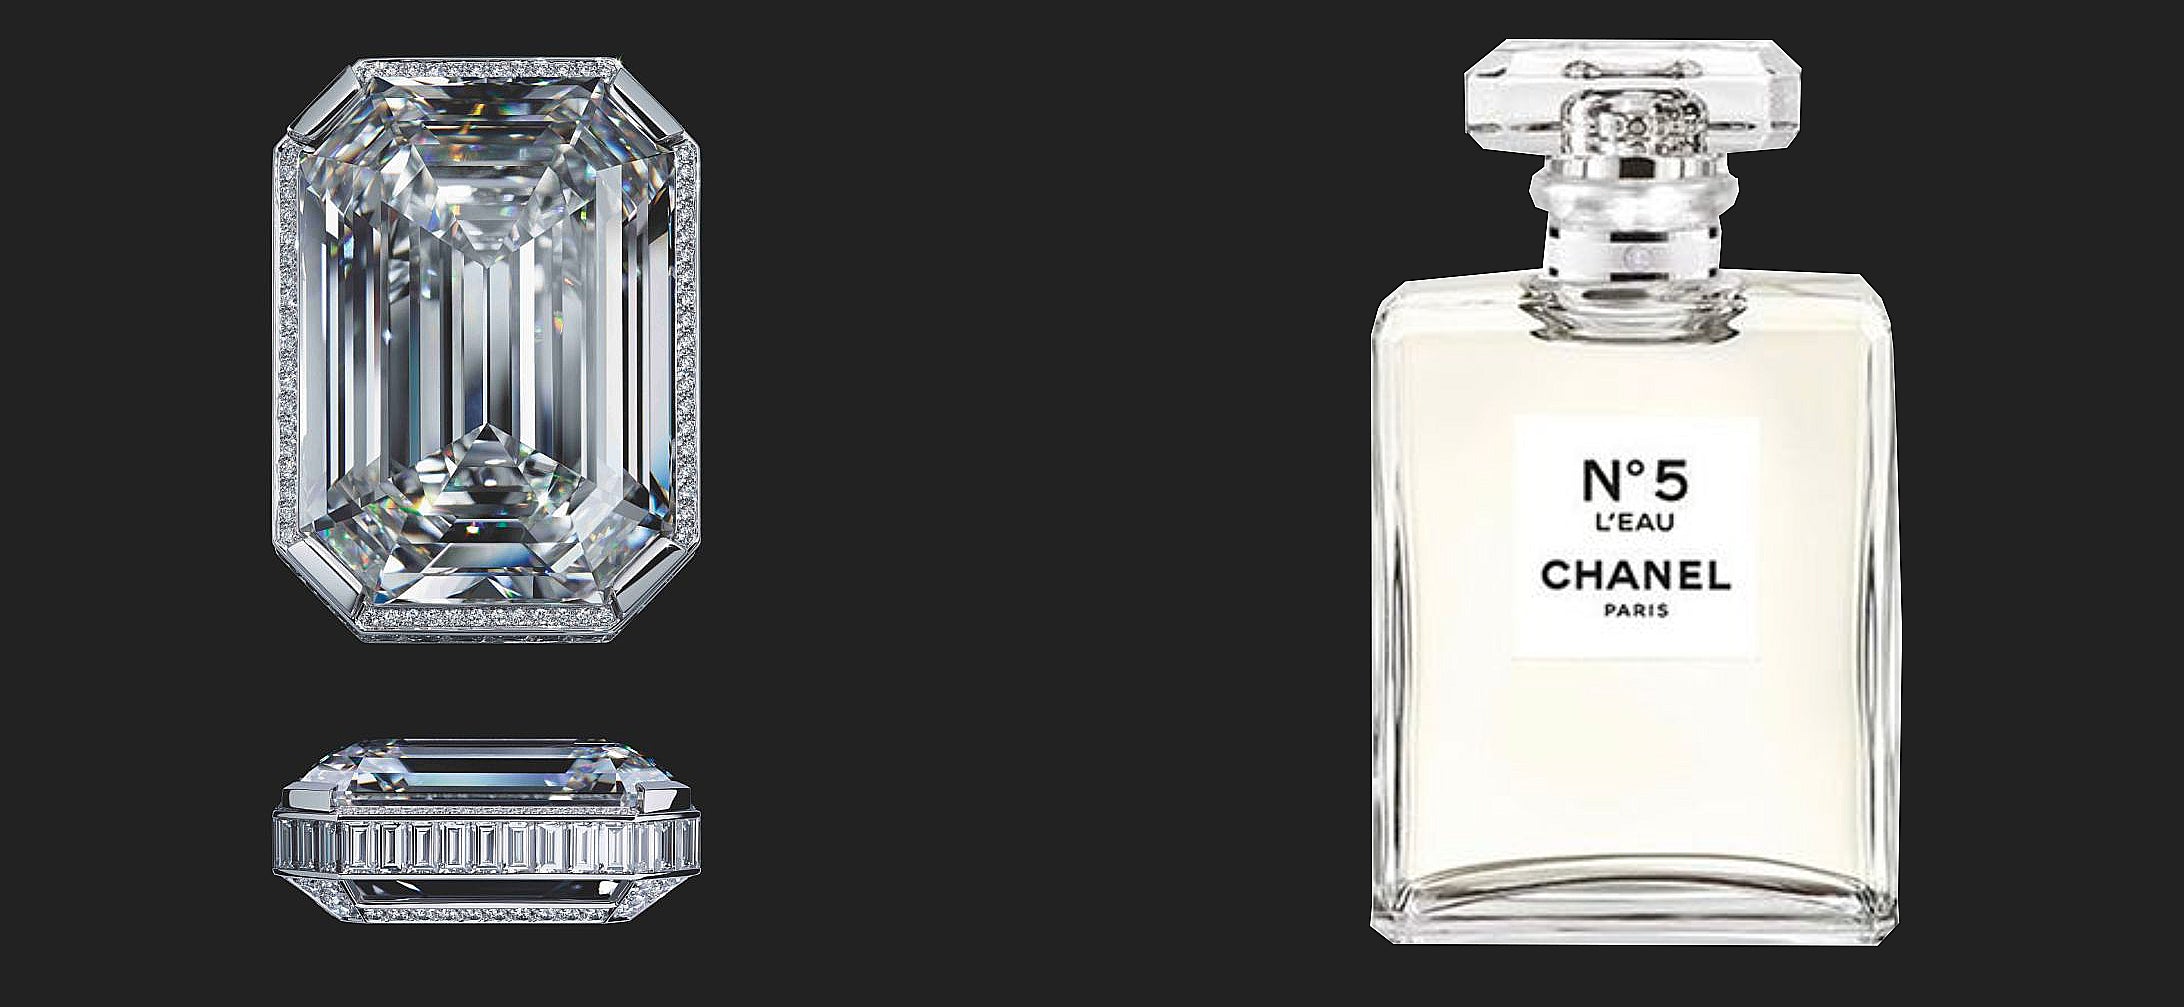 100 Years Of Chanel No. 5 - Anniversary Of An Icon 